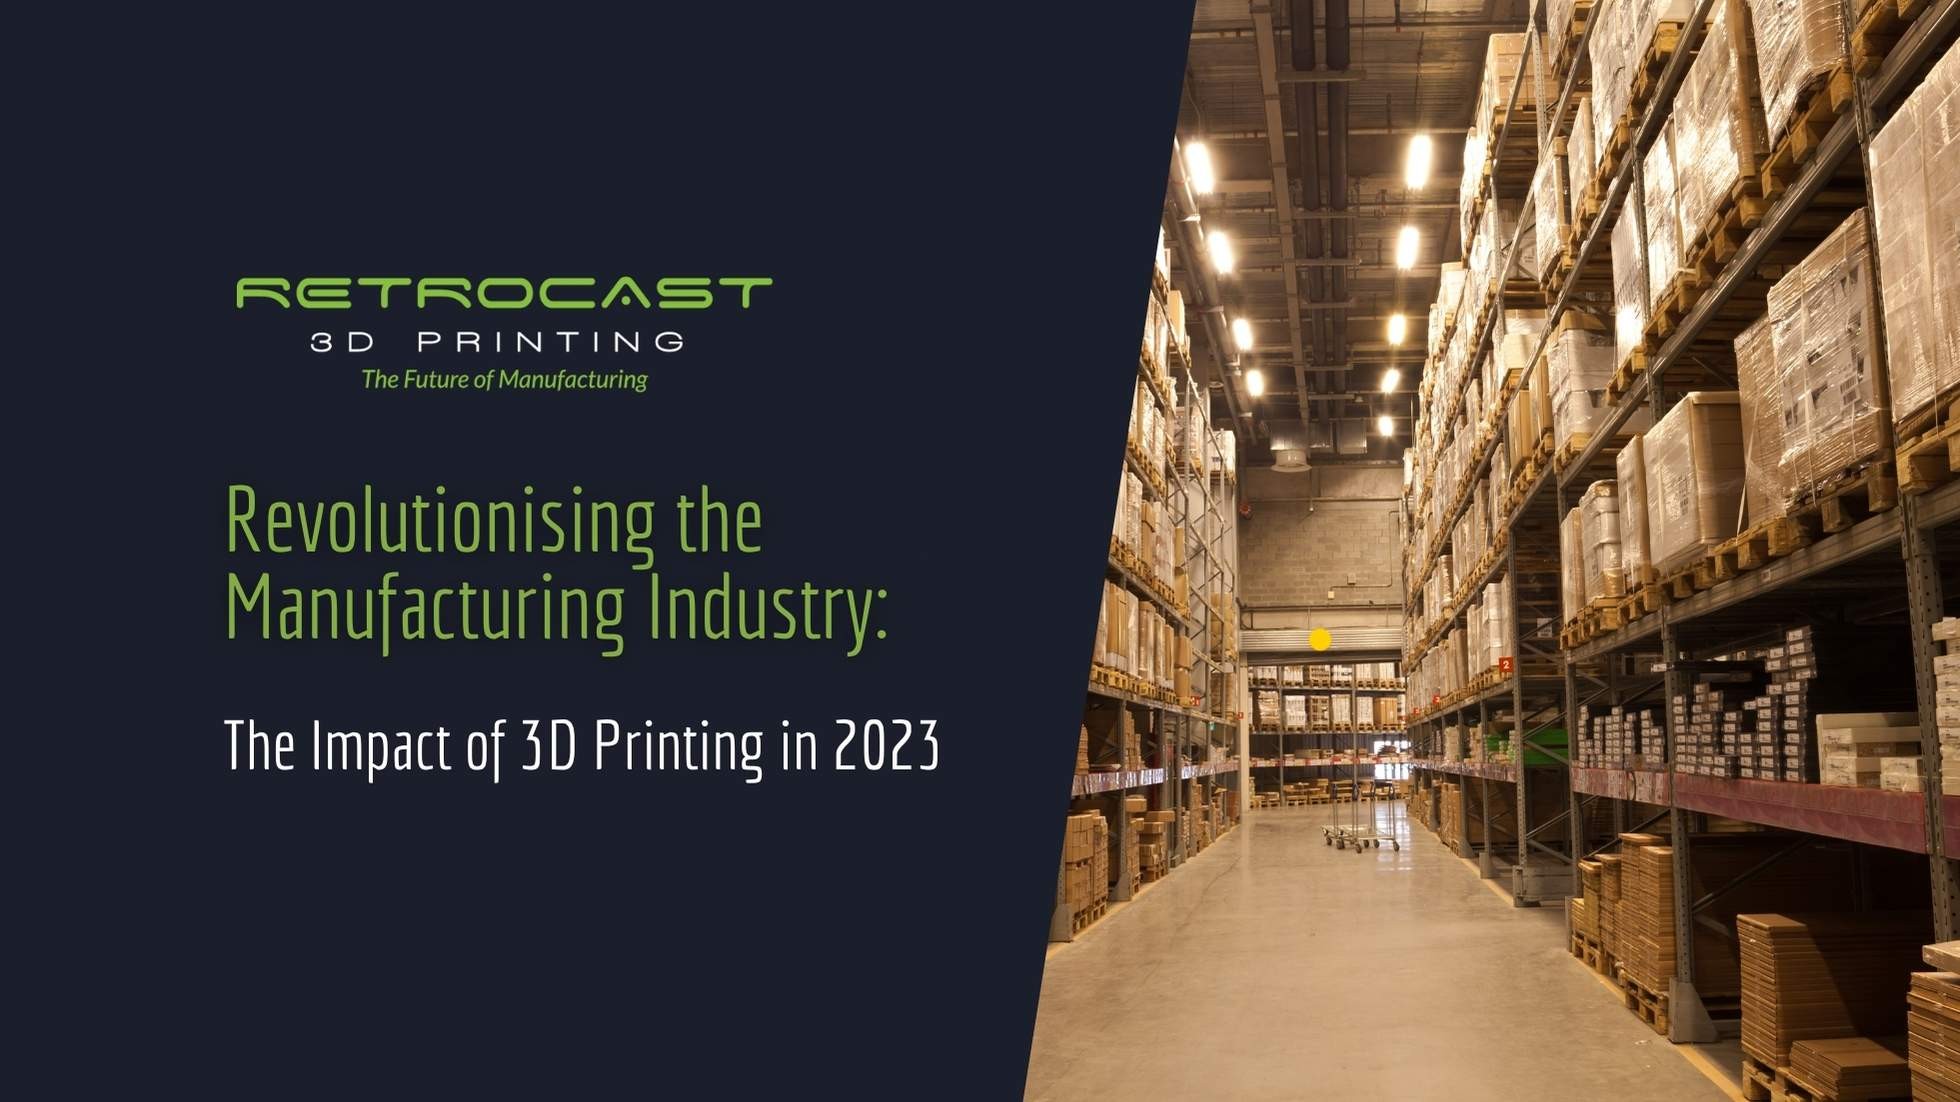 The Impact of 3D Printing on Manufacturing in 2023